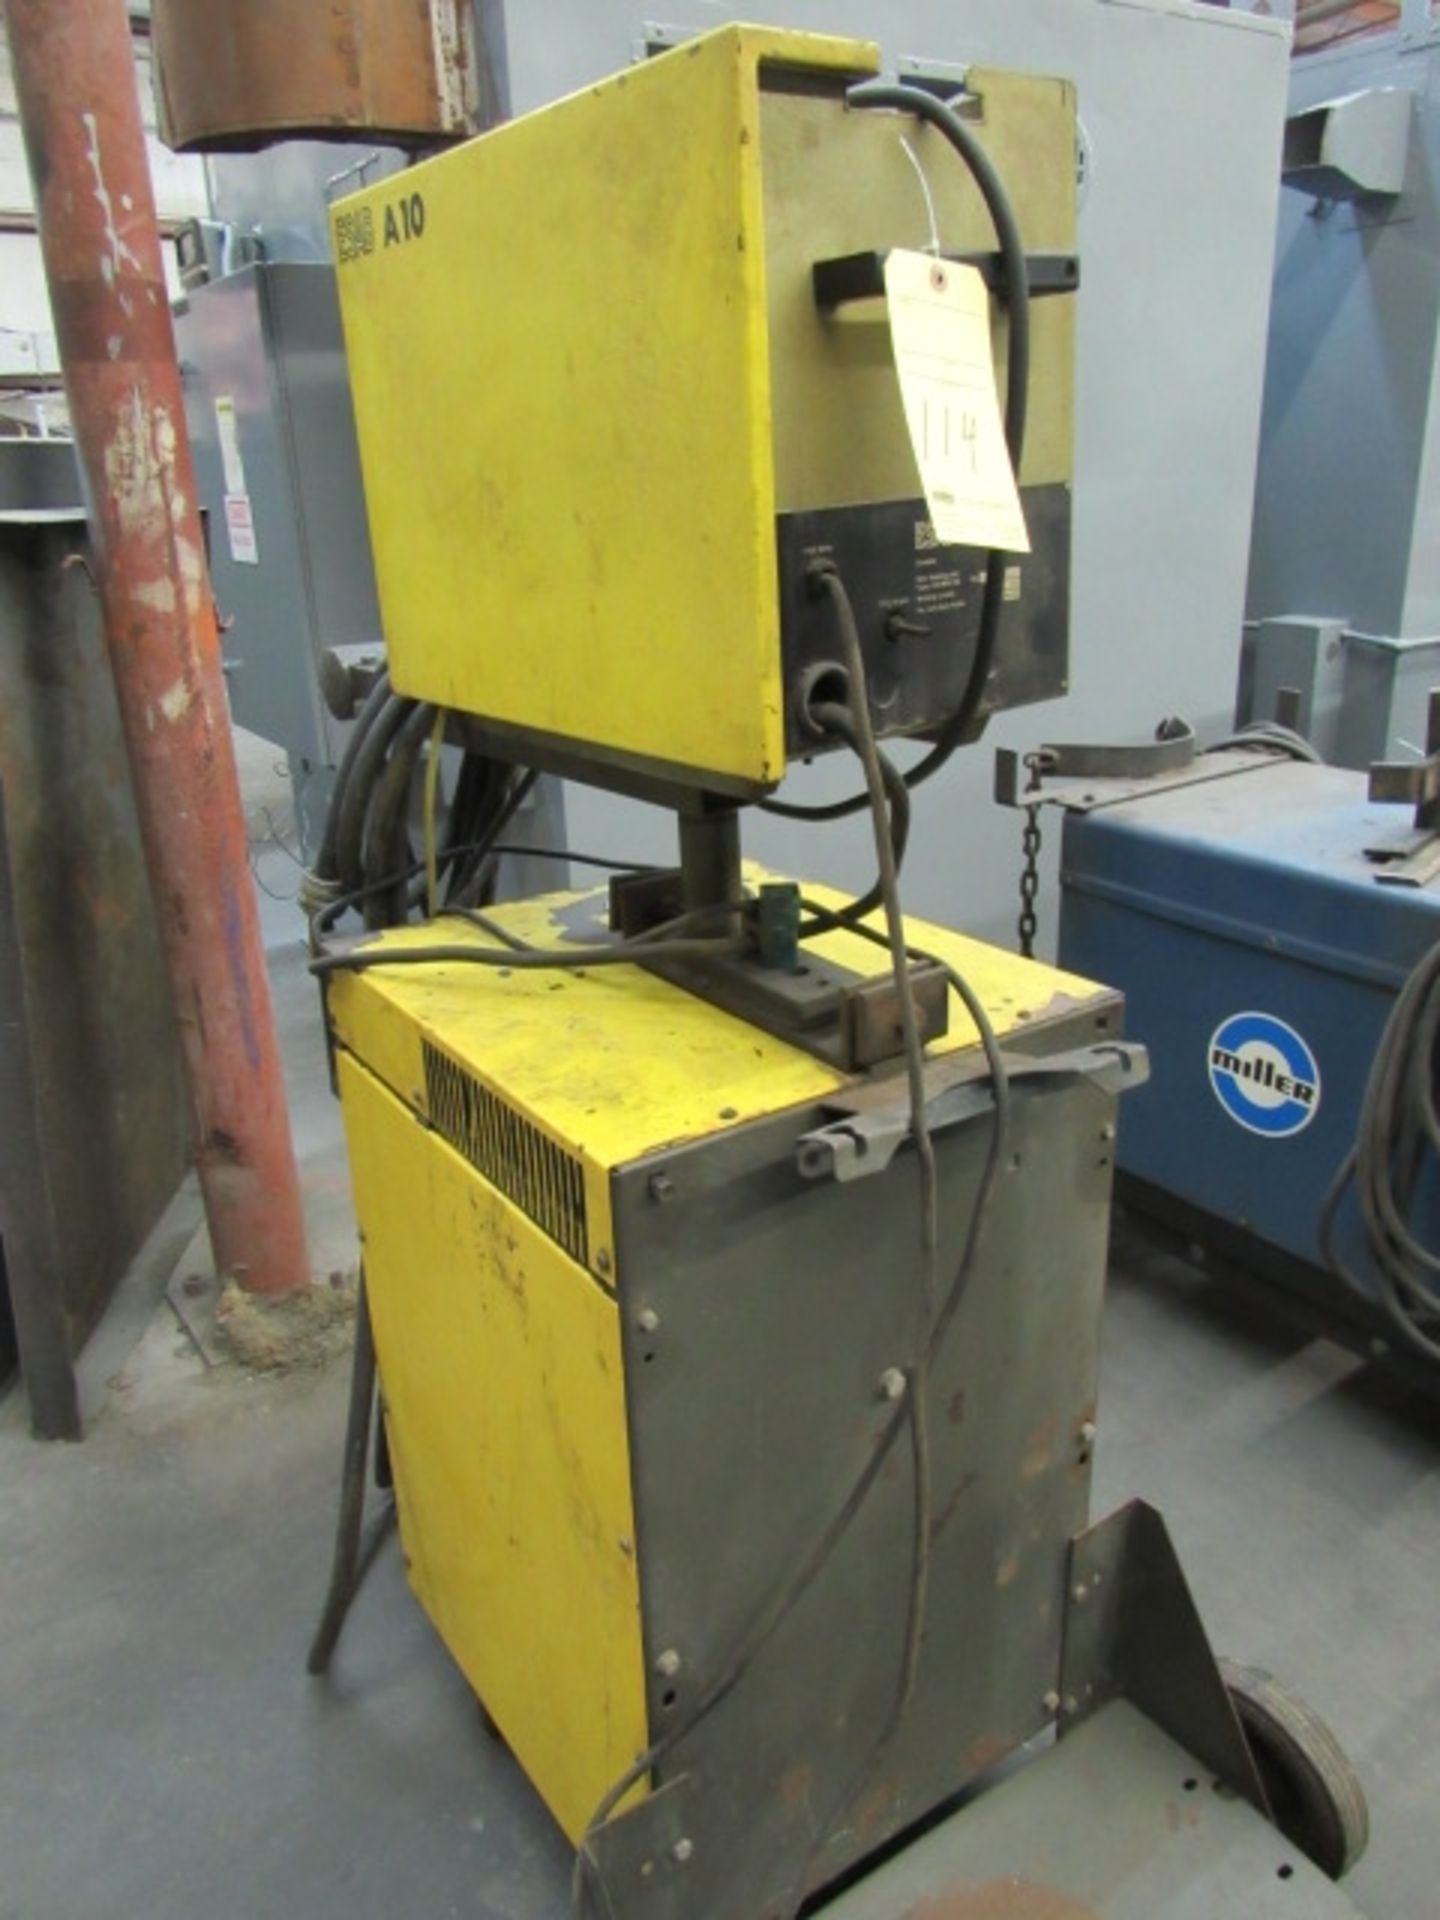 WIRE FEEDER, ESAB A/O MDL. A10-MVC30, 400 amps welding current, 60% max. duty factor, S/N 331-403-